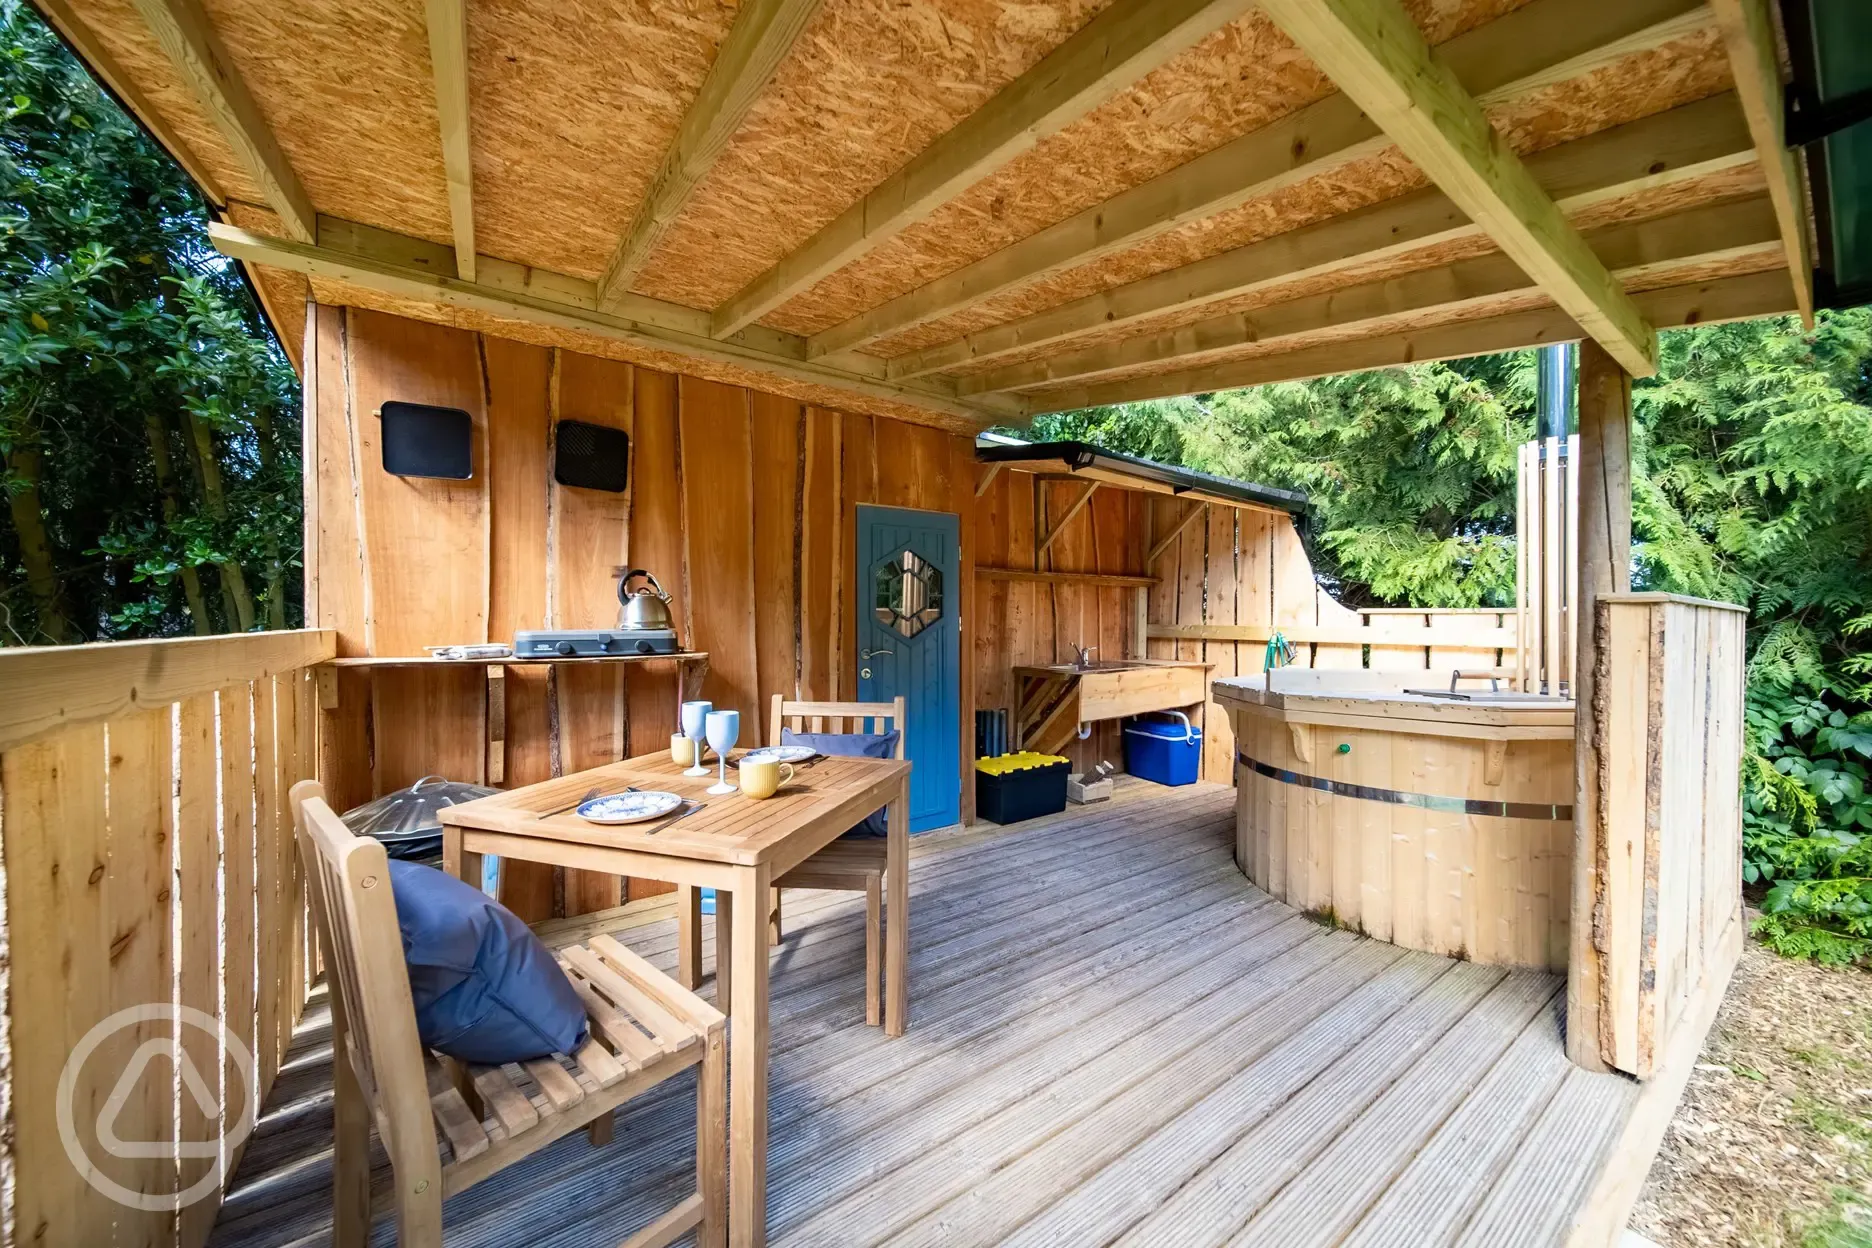 Woodpecker cabin with hot tub decking area